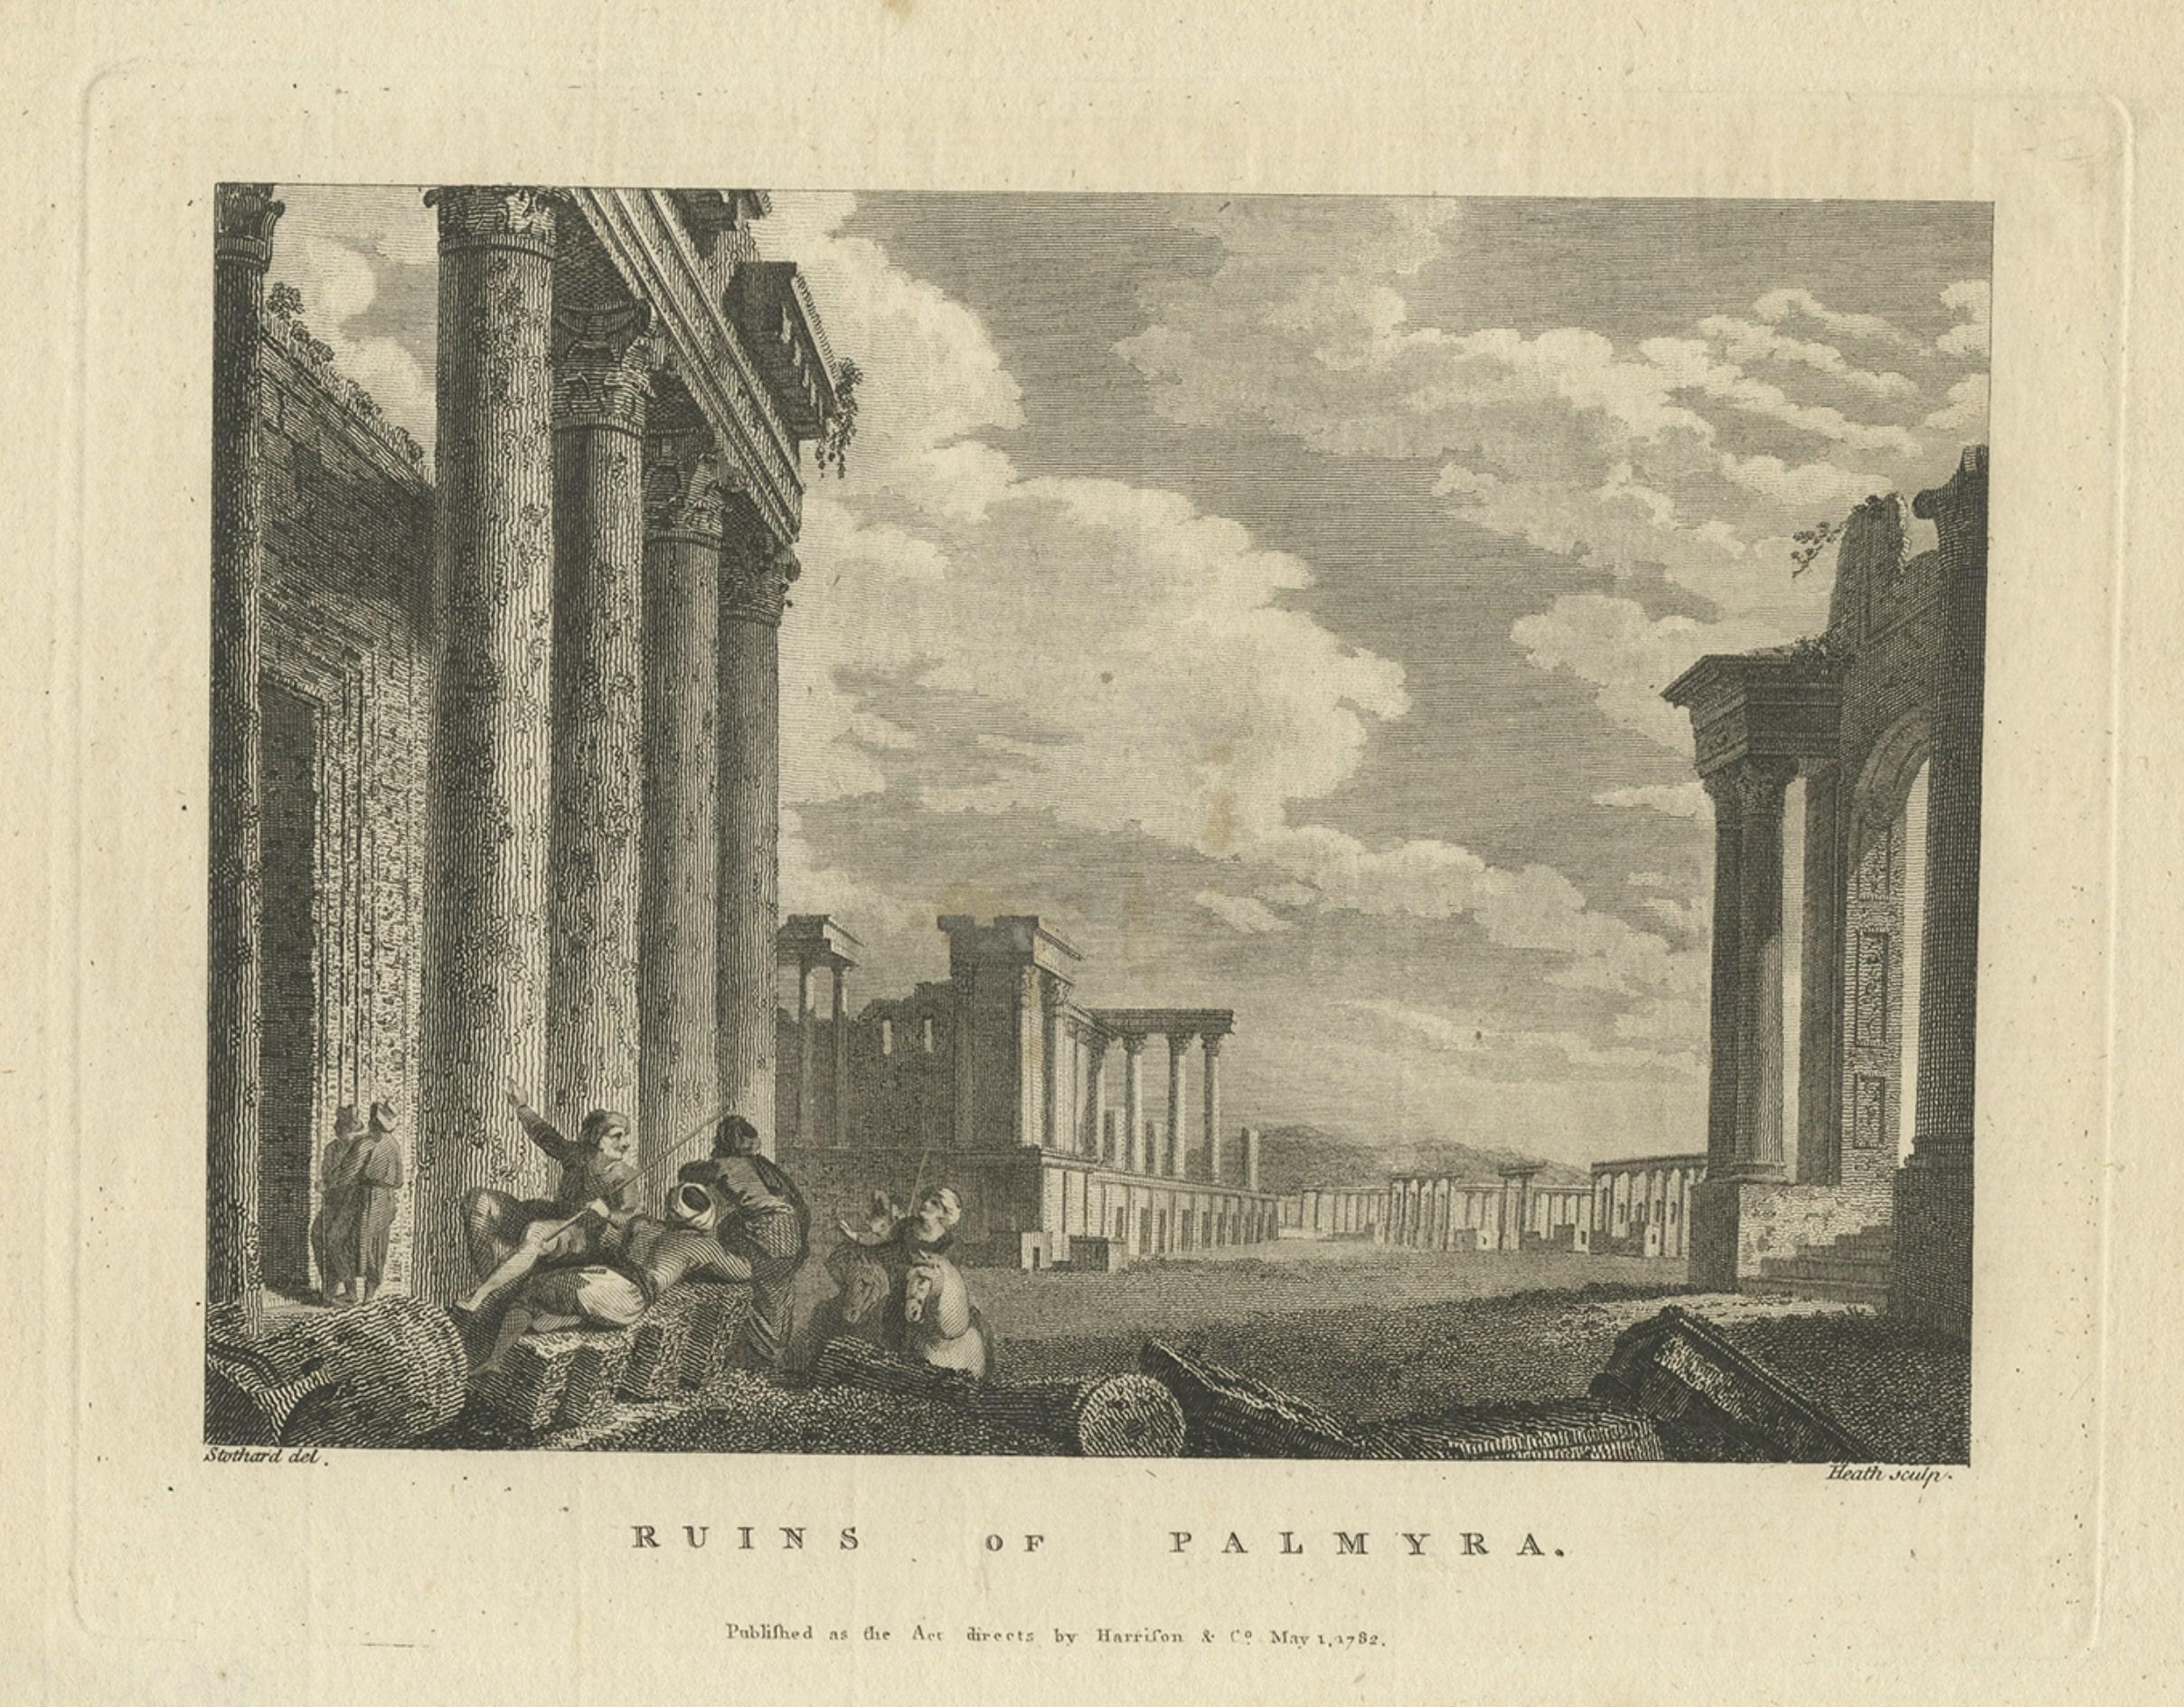 The print is a detailed 18th-century engraving depicting the ruins of the ancient city of Palmyra in Syria. It is titled 